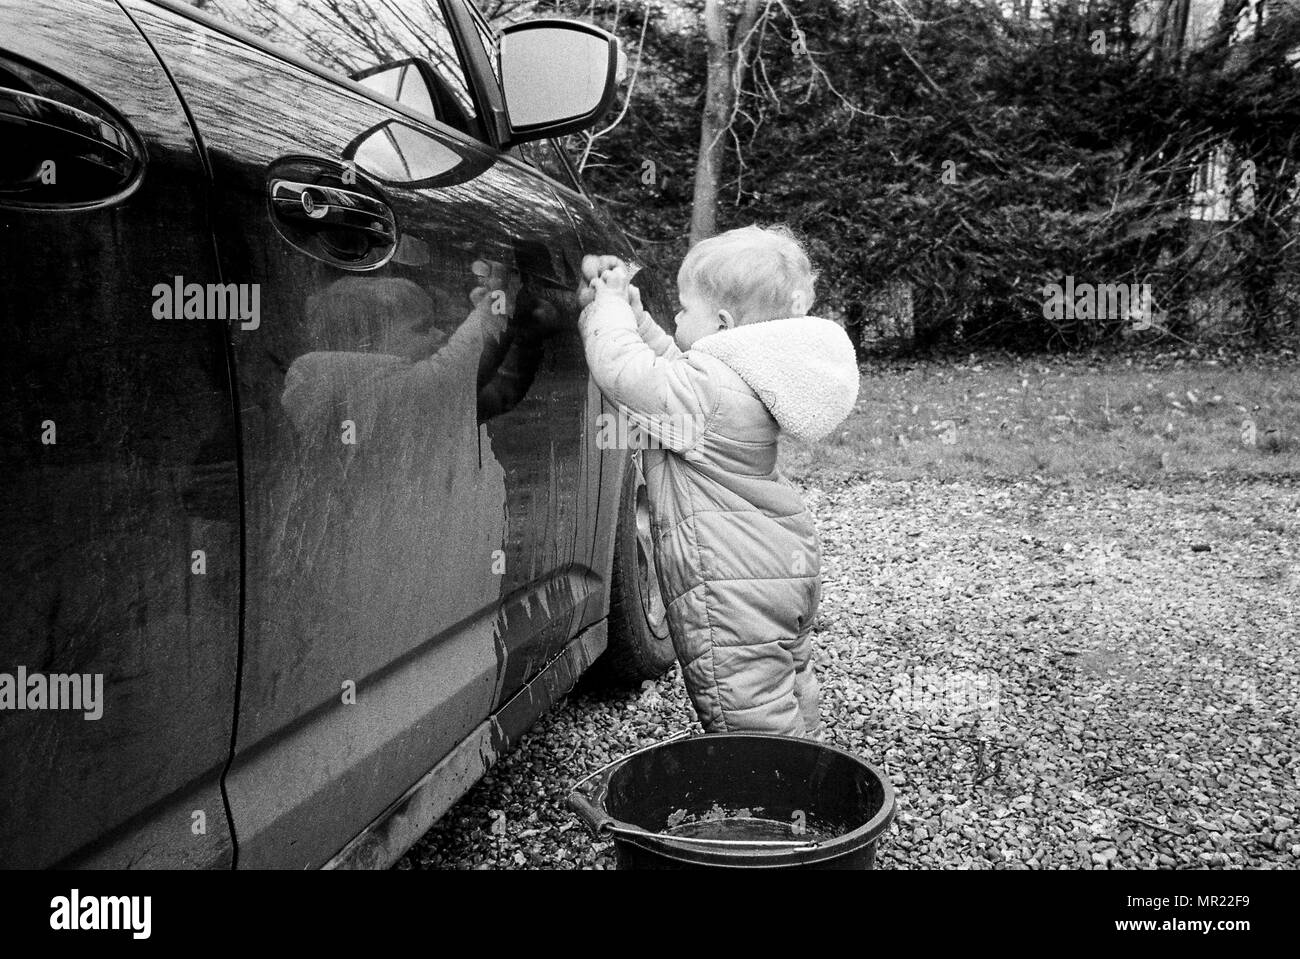 Baby boy, one year old (20Months) washing a car with a sponge. Stock Photo